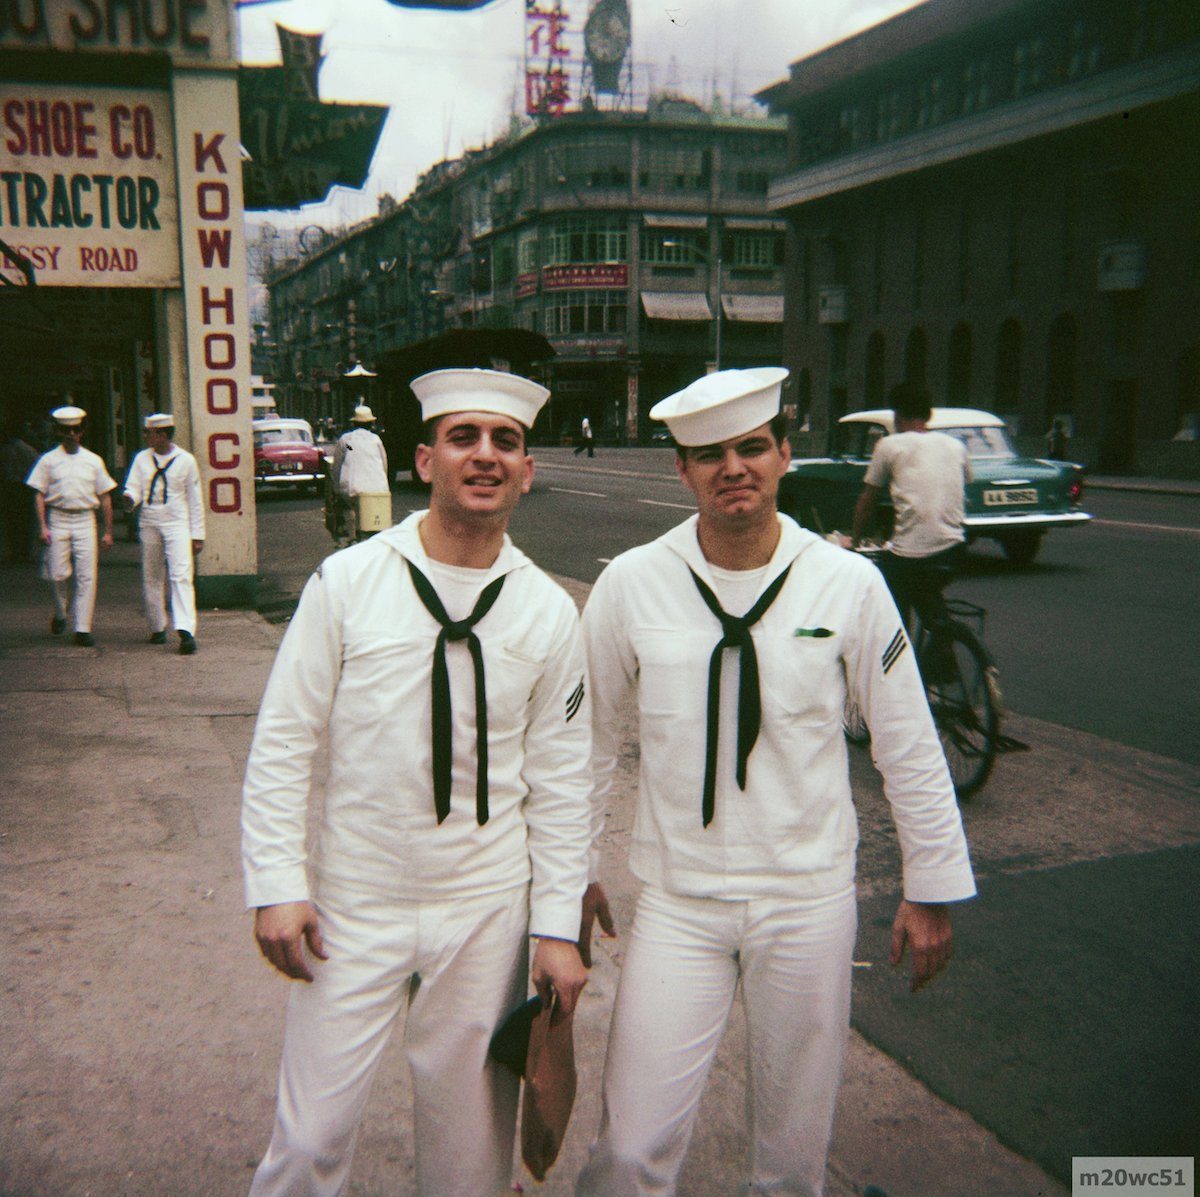 Sailors in Wanchai,1961 They would seem to be on Hennessy Road. That distinctive building on the right should pinpoint the location. Anyone recognize it? My 1960 guide book states that the Kow Hoo Shoe Co. was at 19-21 Hennessy Road. The sign for the 'Union Bar' can be seen. It was at 23 Hennessy Road.